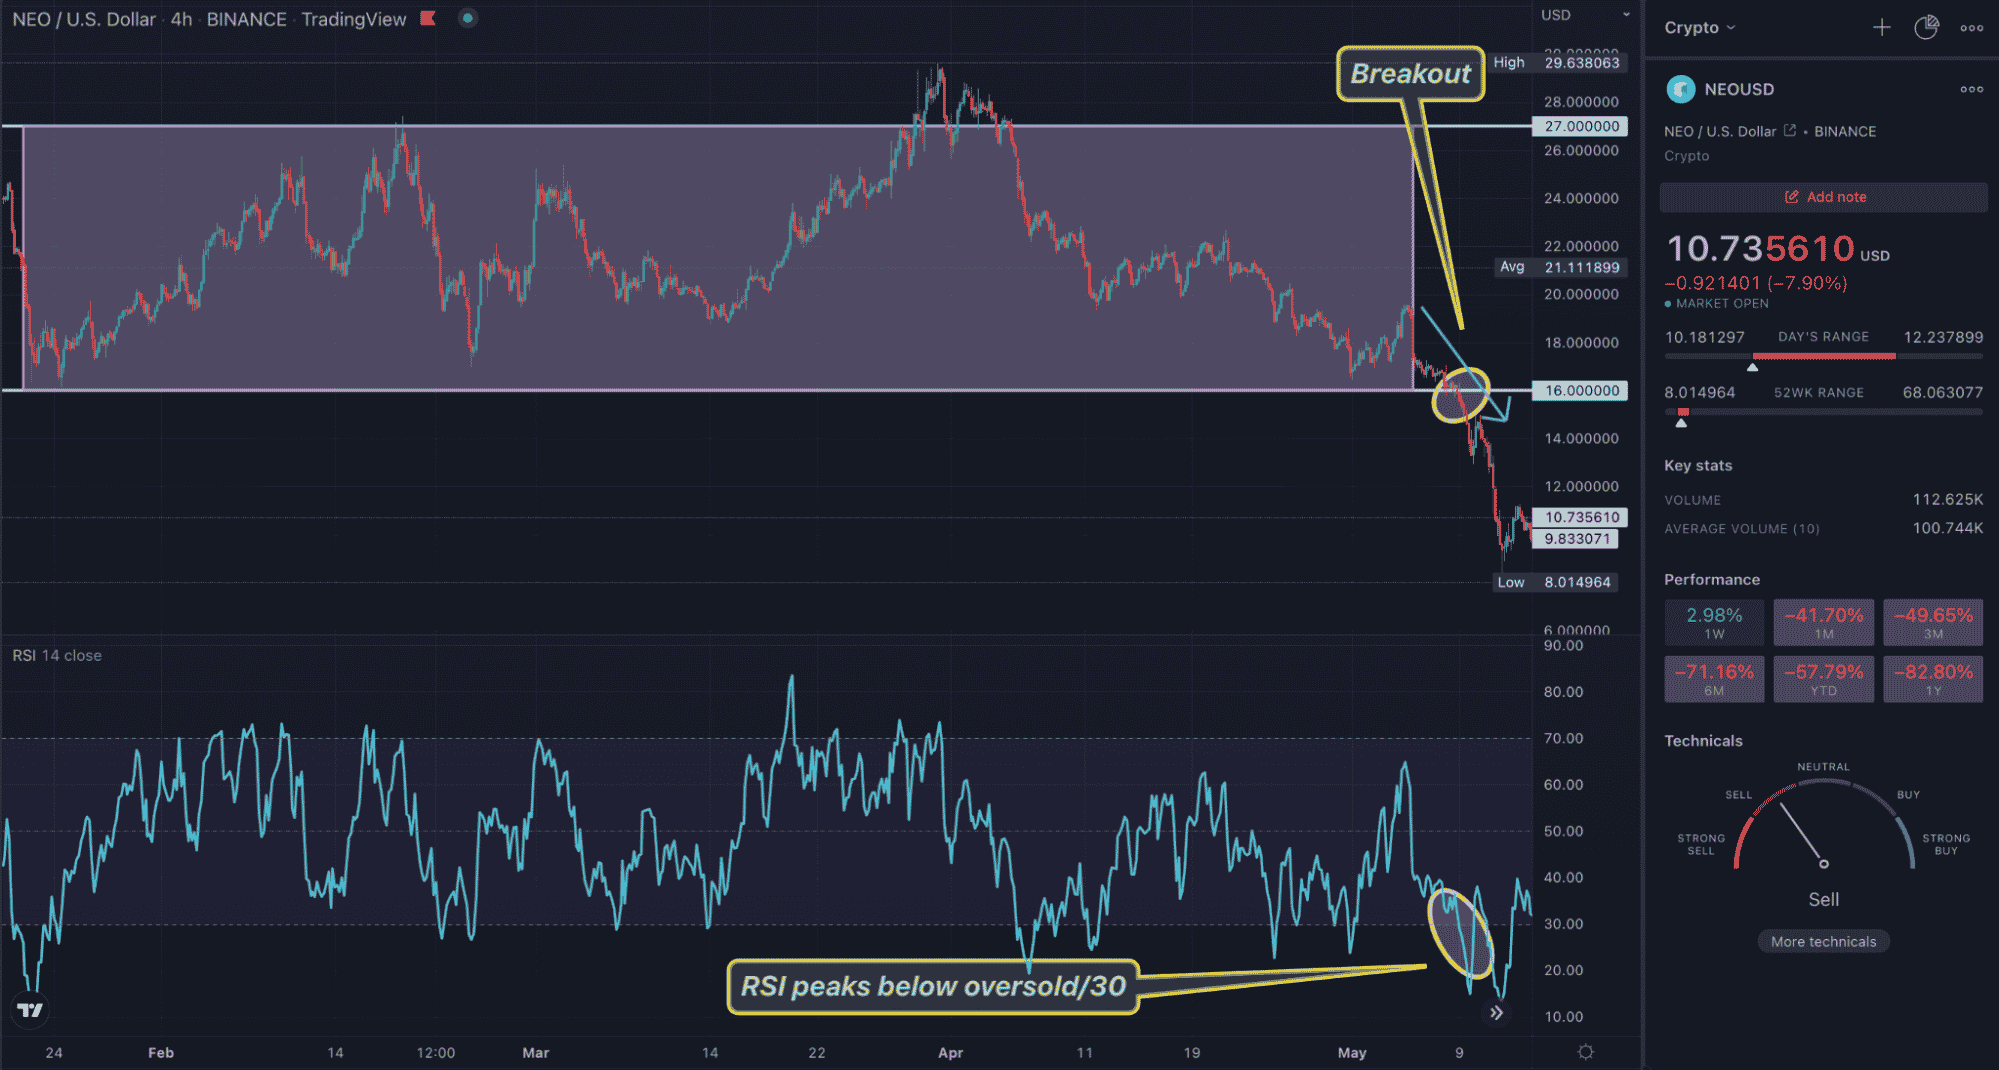 NEO TradingView 4HR chart showing a breakout range trading strategy